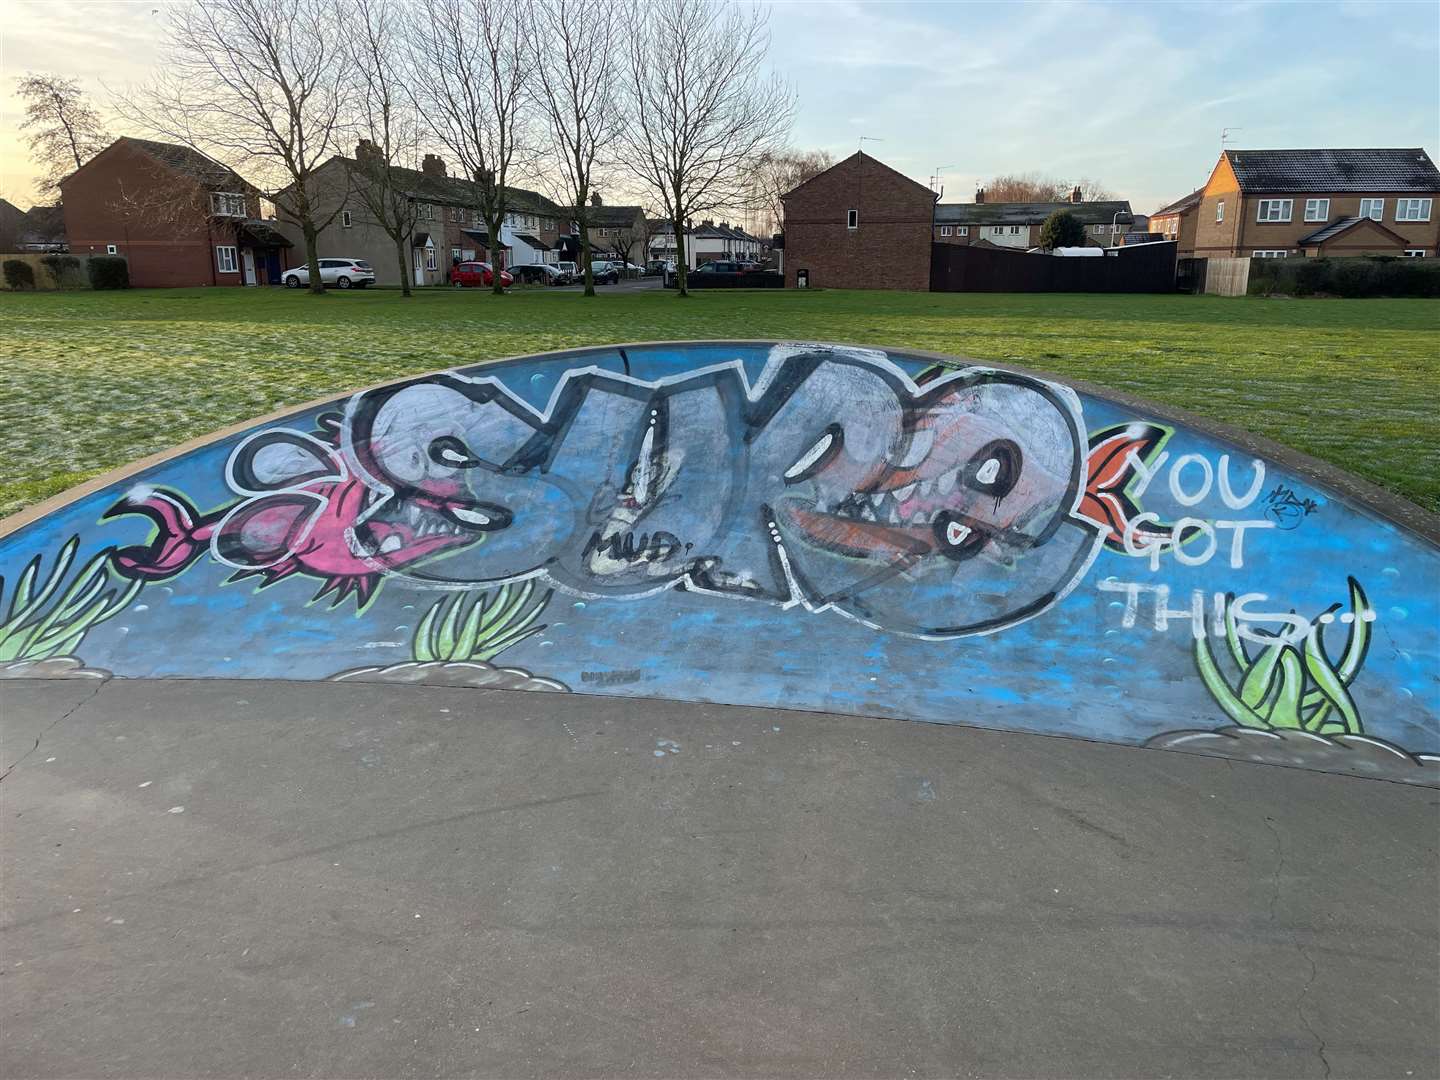 The St Paul's skate park fish mural has been defaced